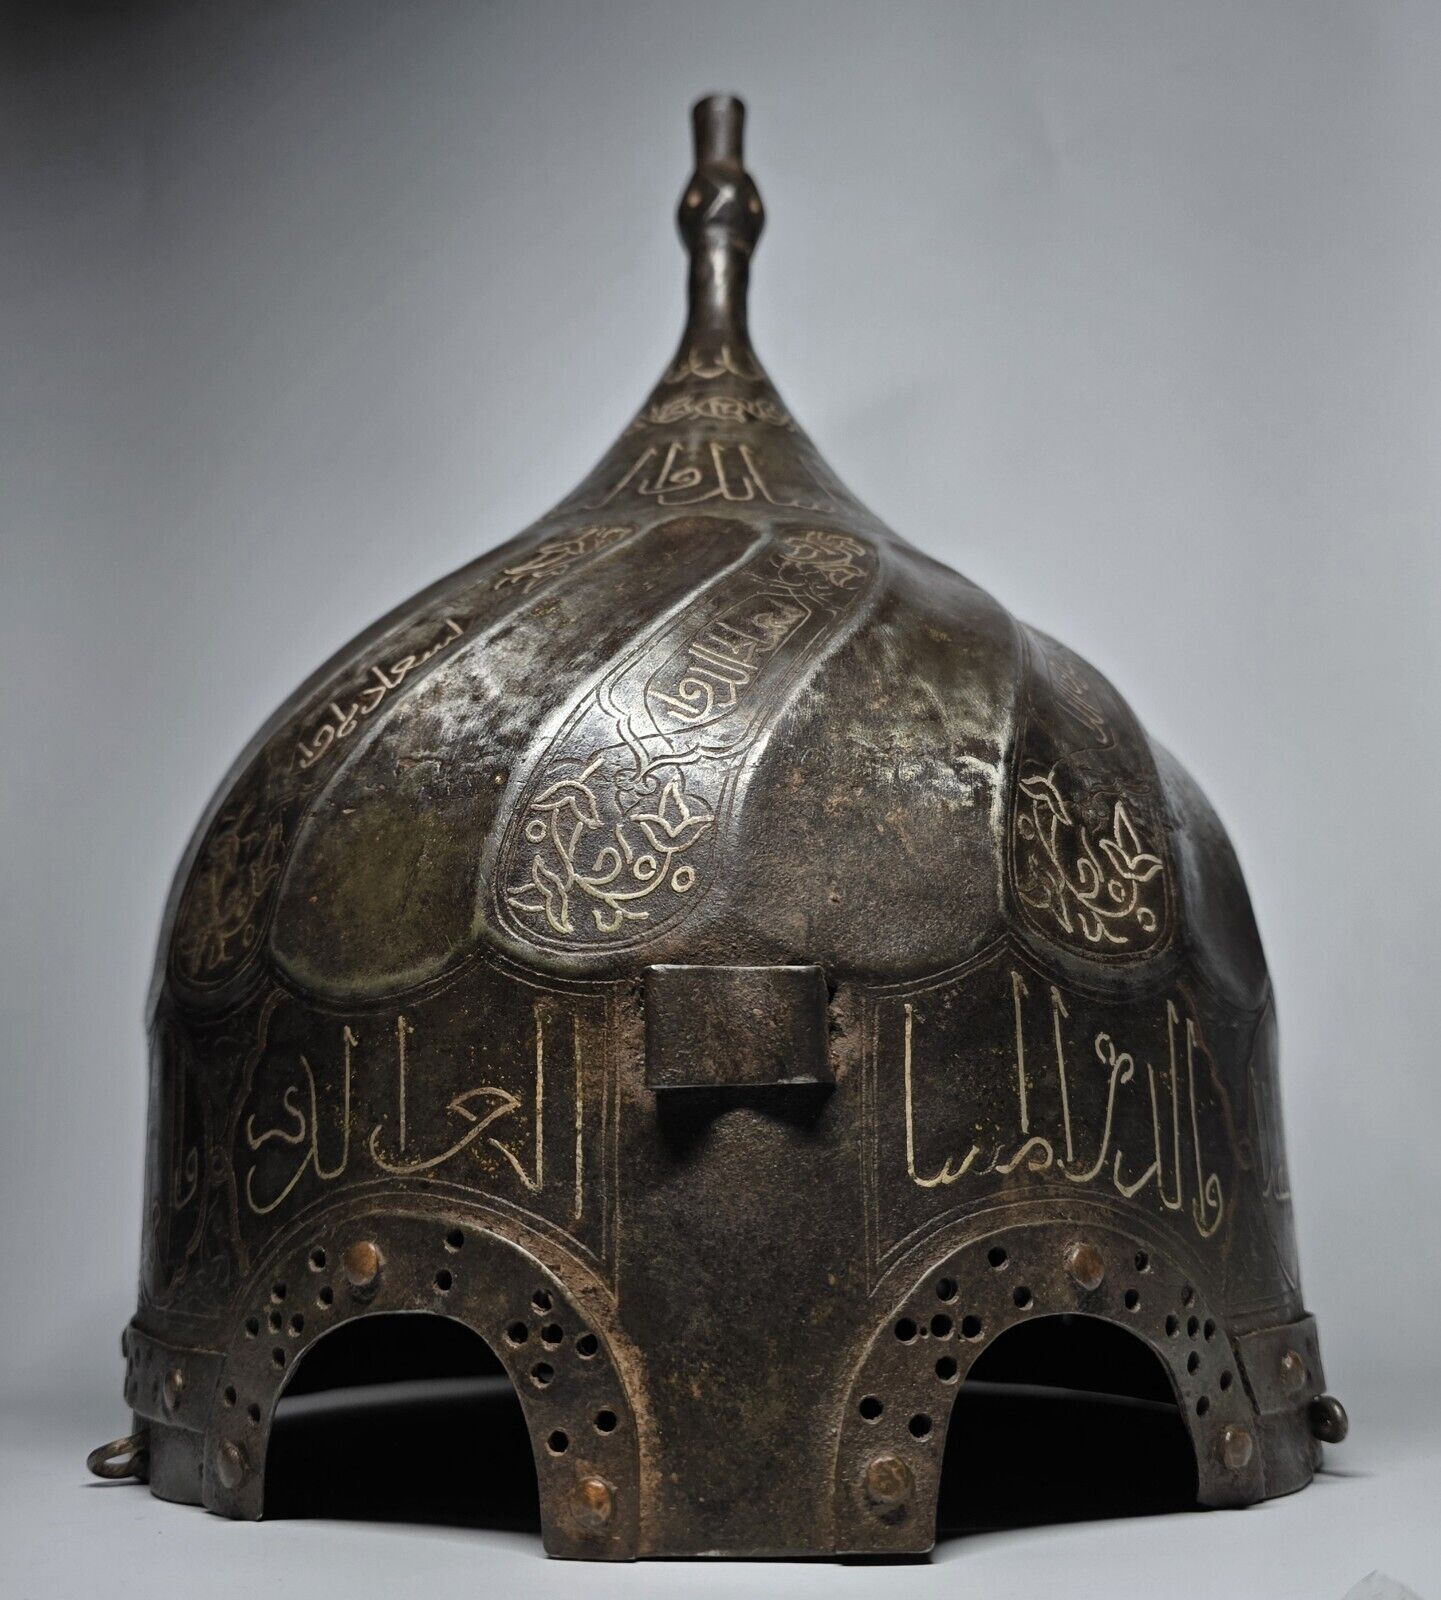 AN IMPORTANT PERSIAN OTTOMAN STEEL HELMET WITH SILVER KUFIC INSCRIPTIONS,DESIGNS